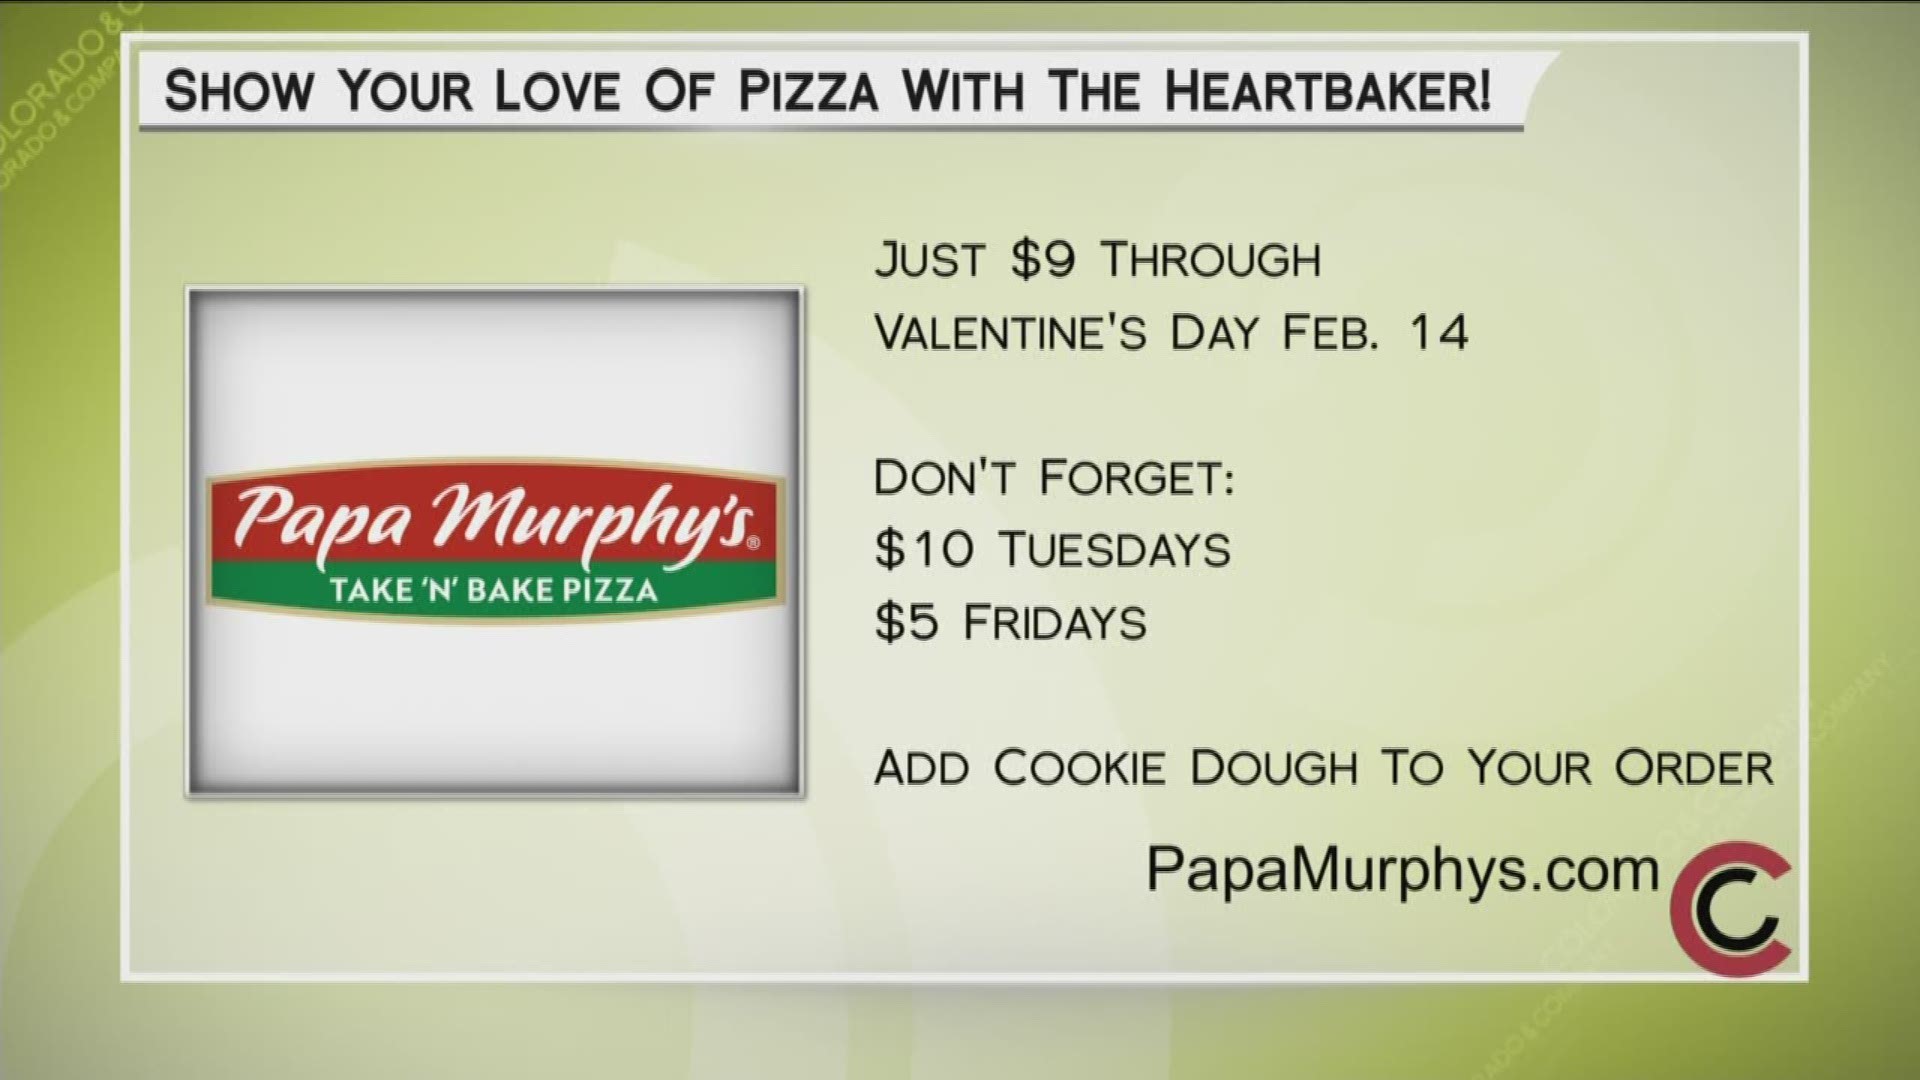 They make it, you bake it. Stop by your local apa Murphy's location to get the Sweetheart of a deal. Learn more and find one near you at PapaMurphys.com.